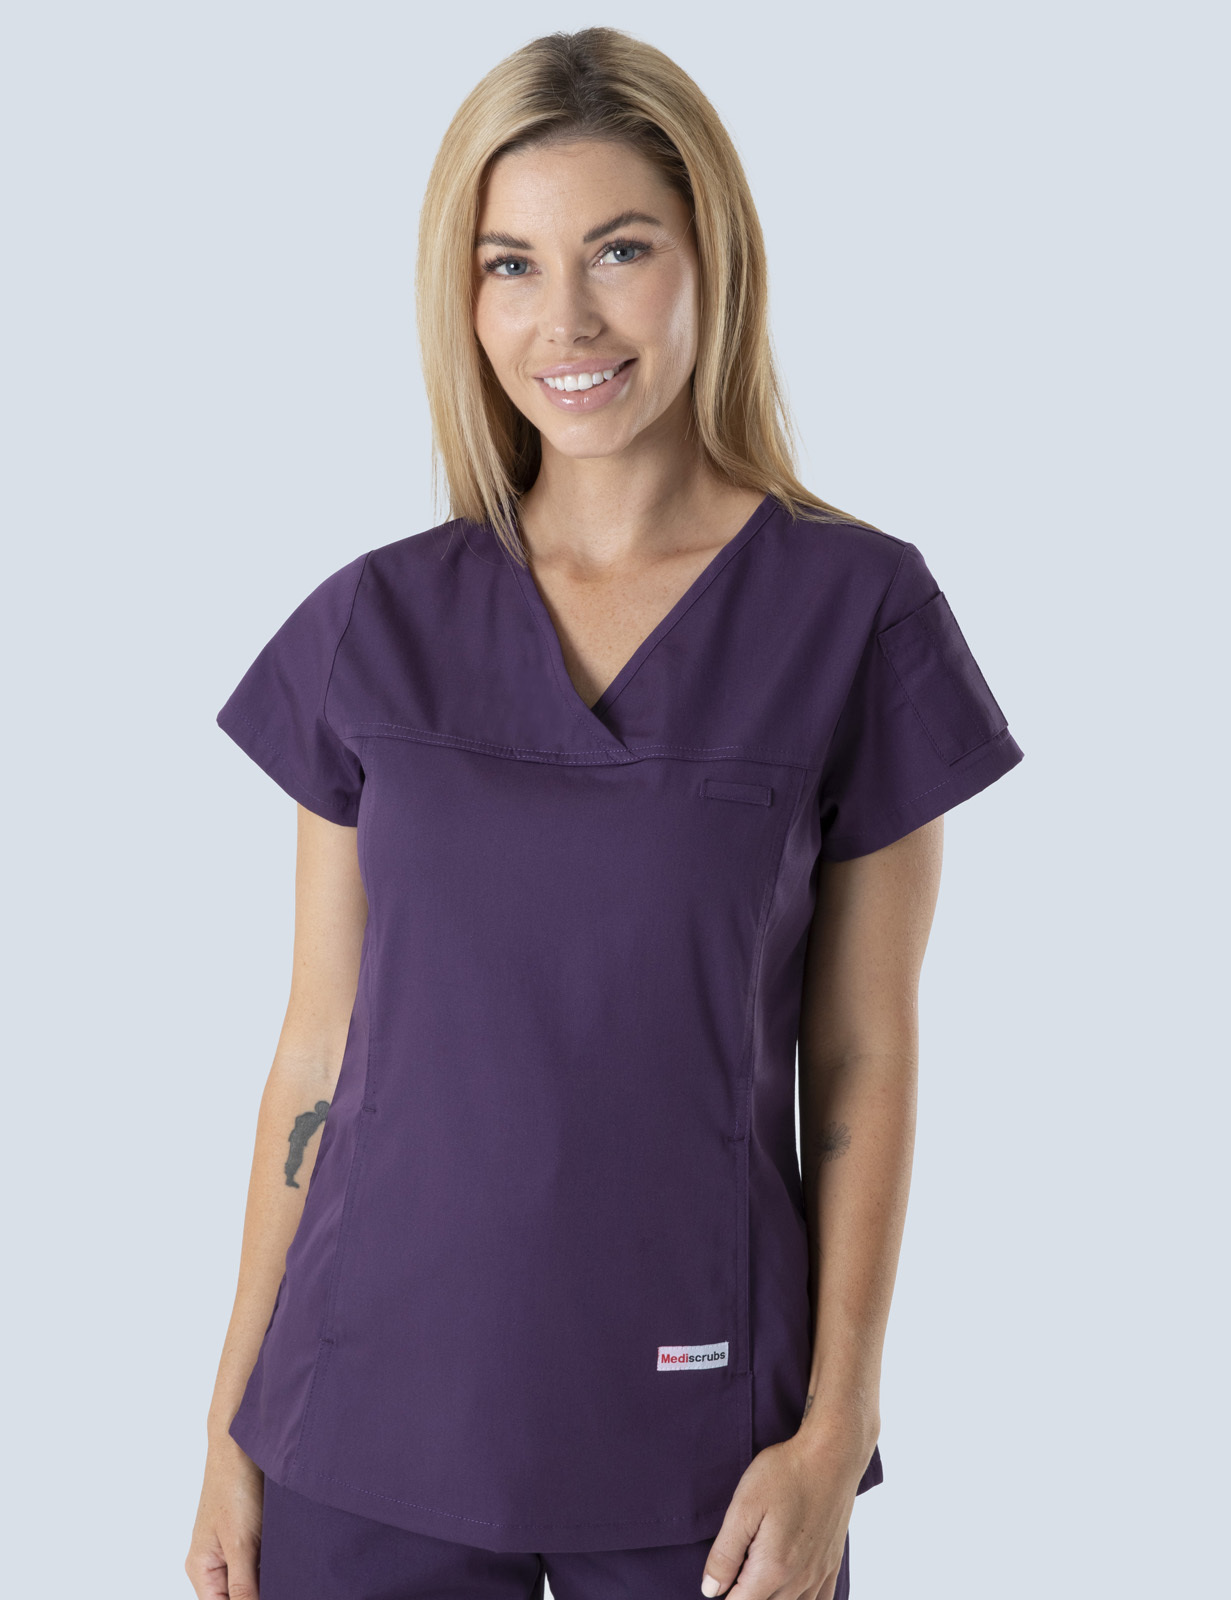 NWRH - Oncology RN (Women's Fit Solid in Aubergine incl Logos)